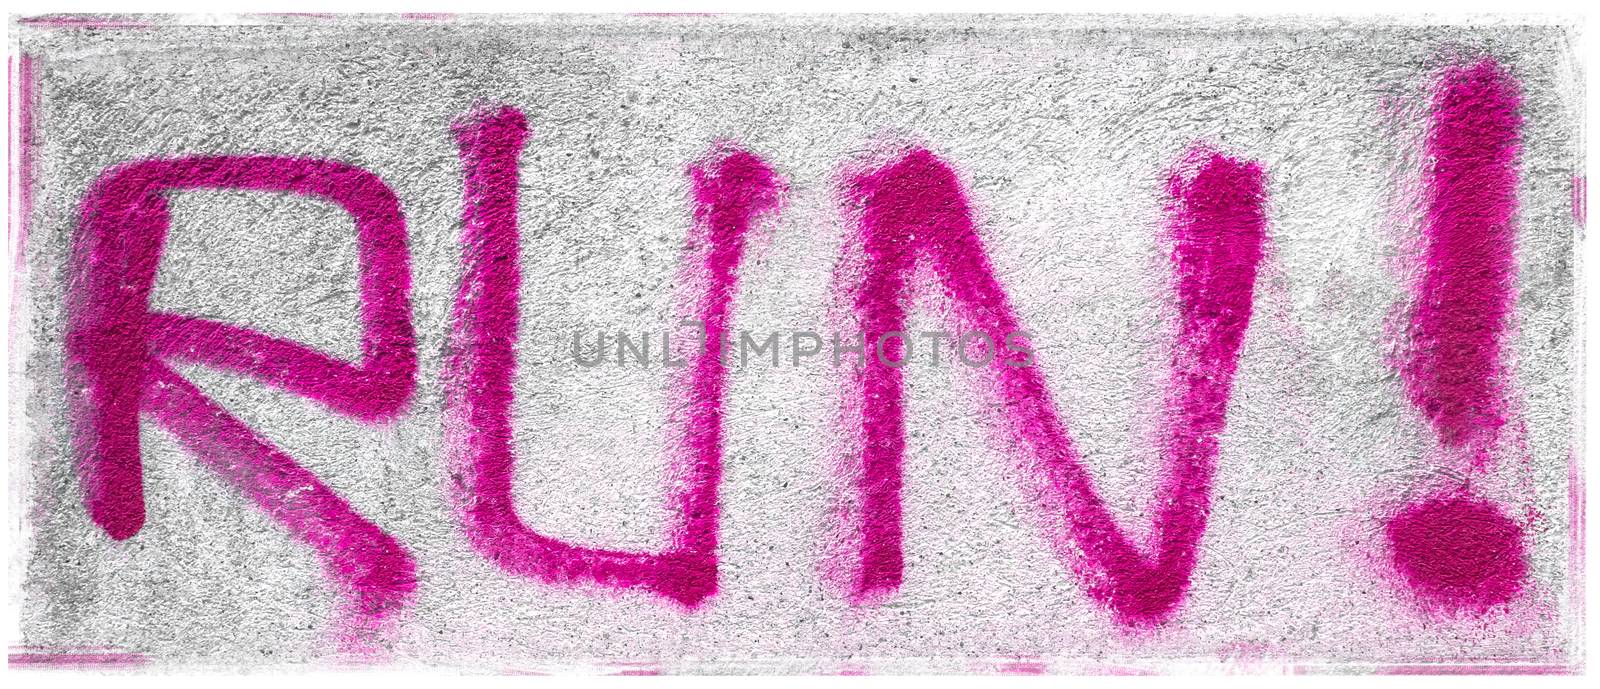 Graffiti PINK text RUN. Ideal for your grungy creative works.